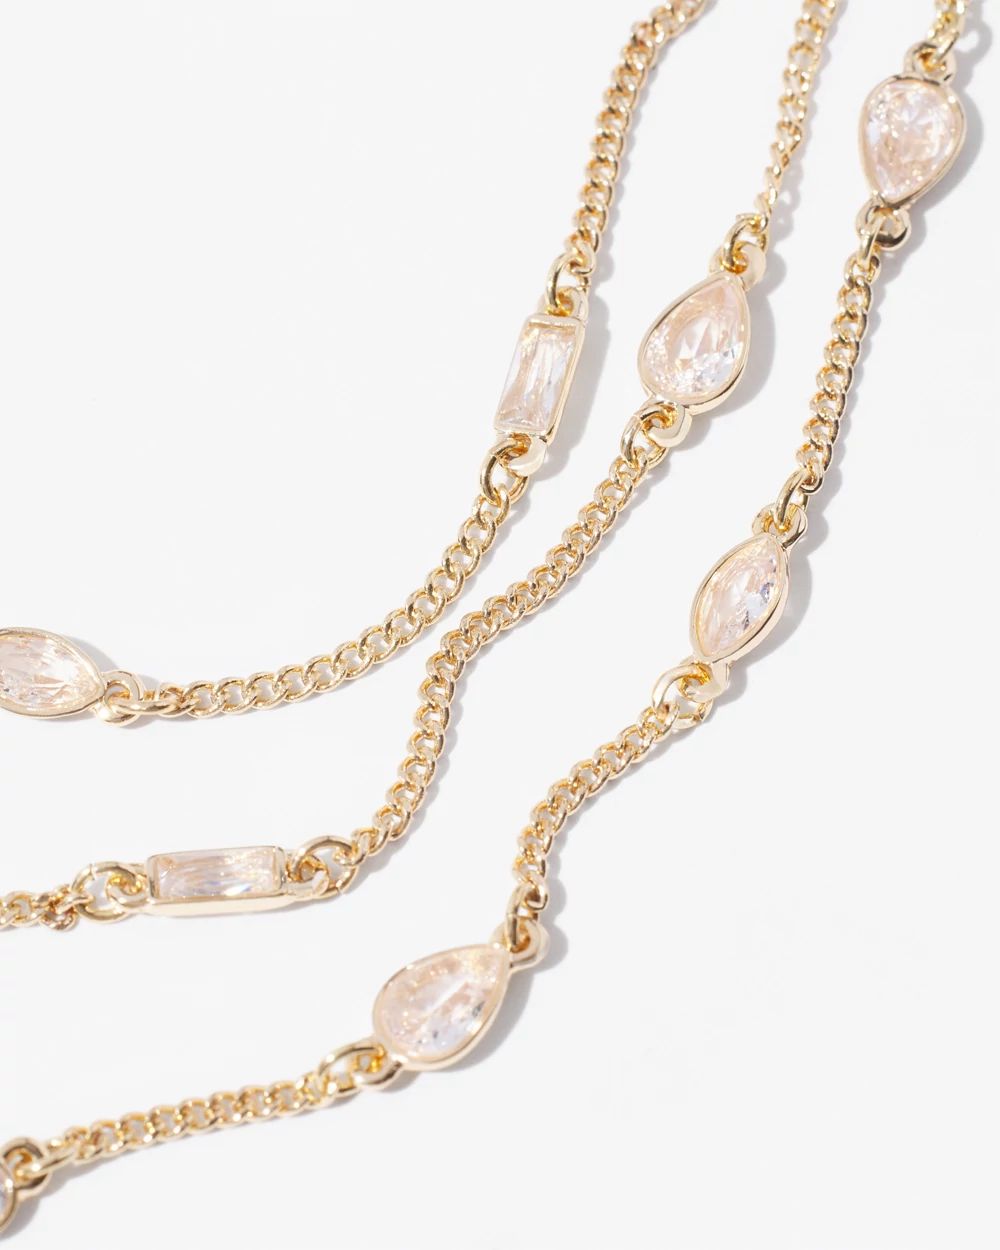 Gold Convertible Bezel Multiple Strand Necklace click to view larger image.